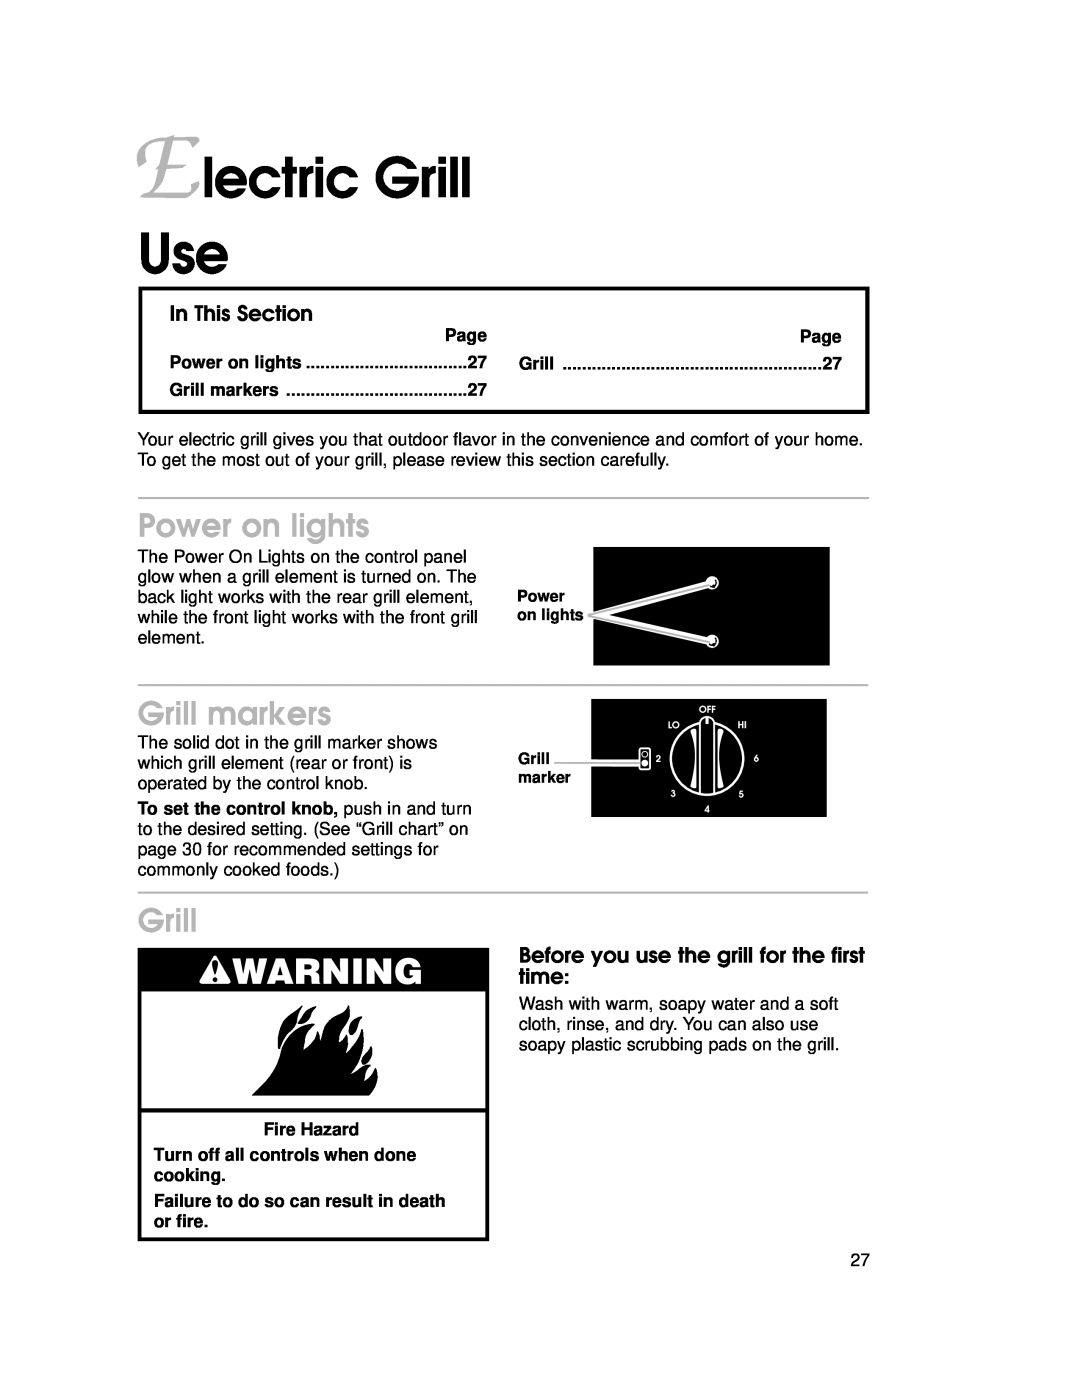 KitchenAid KECG020, KSVD060B Electric Grill Use, Grill markers, Before you use the grill for the first time, wWARNING 